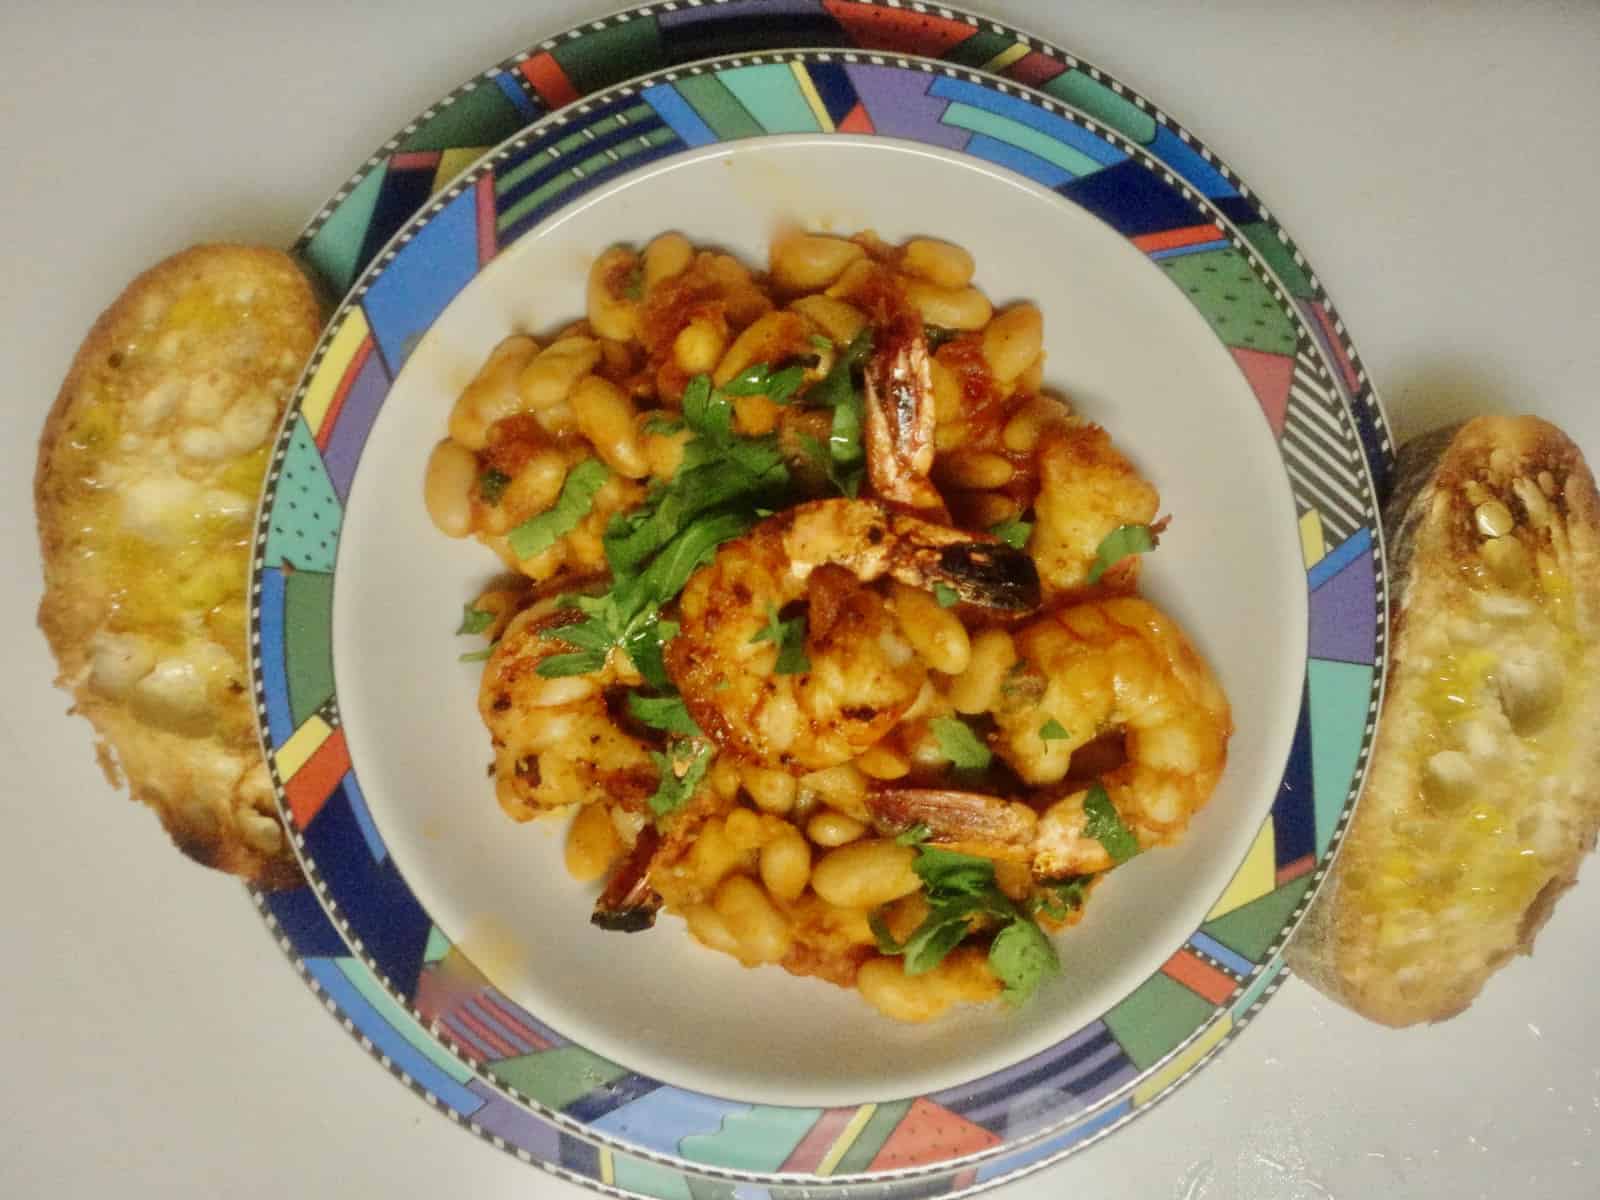 Garlic Shrimp and Cannellini Beans adapted from Bon Appetit